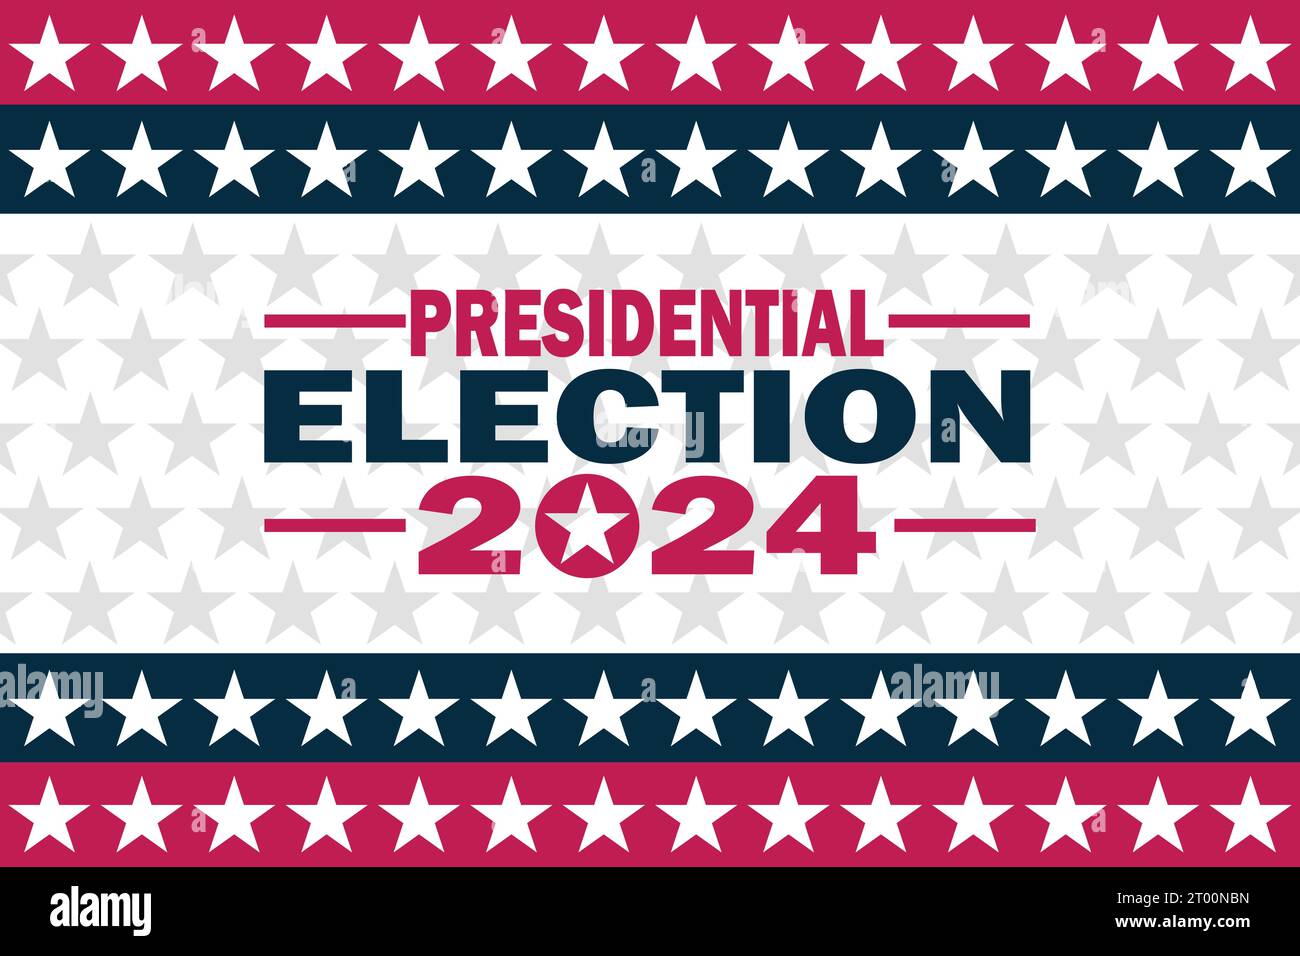 Presidential Election 2024 Vector illustration. Politics and voting concept. Template for background, banner, card, poster with text inscription. Stock Vector